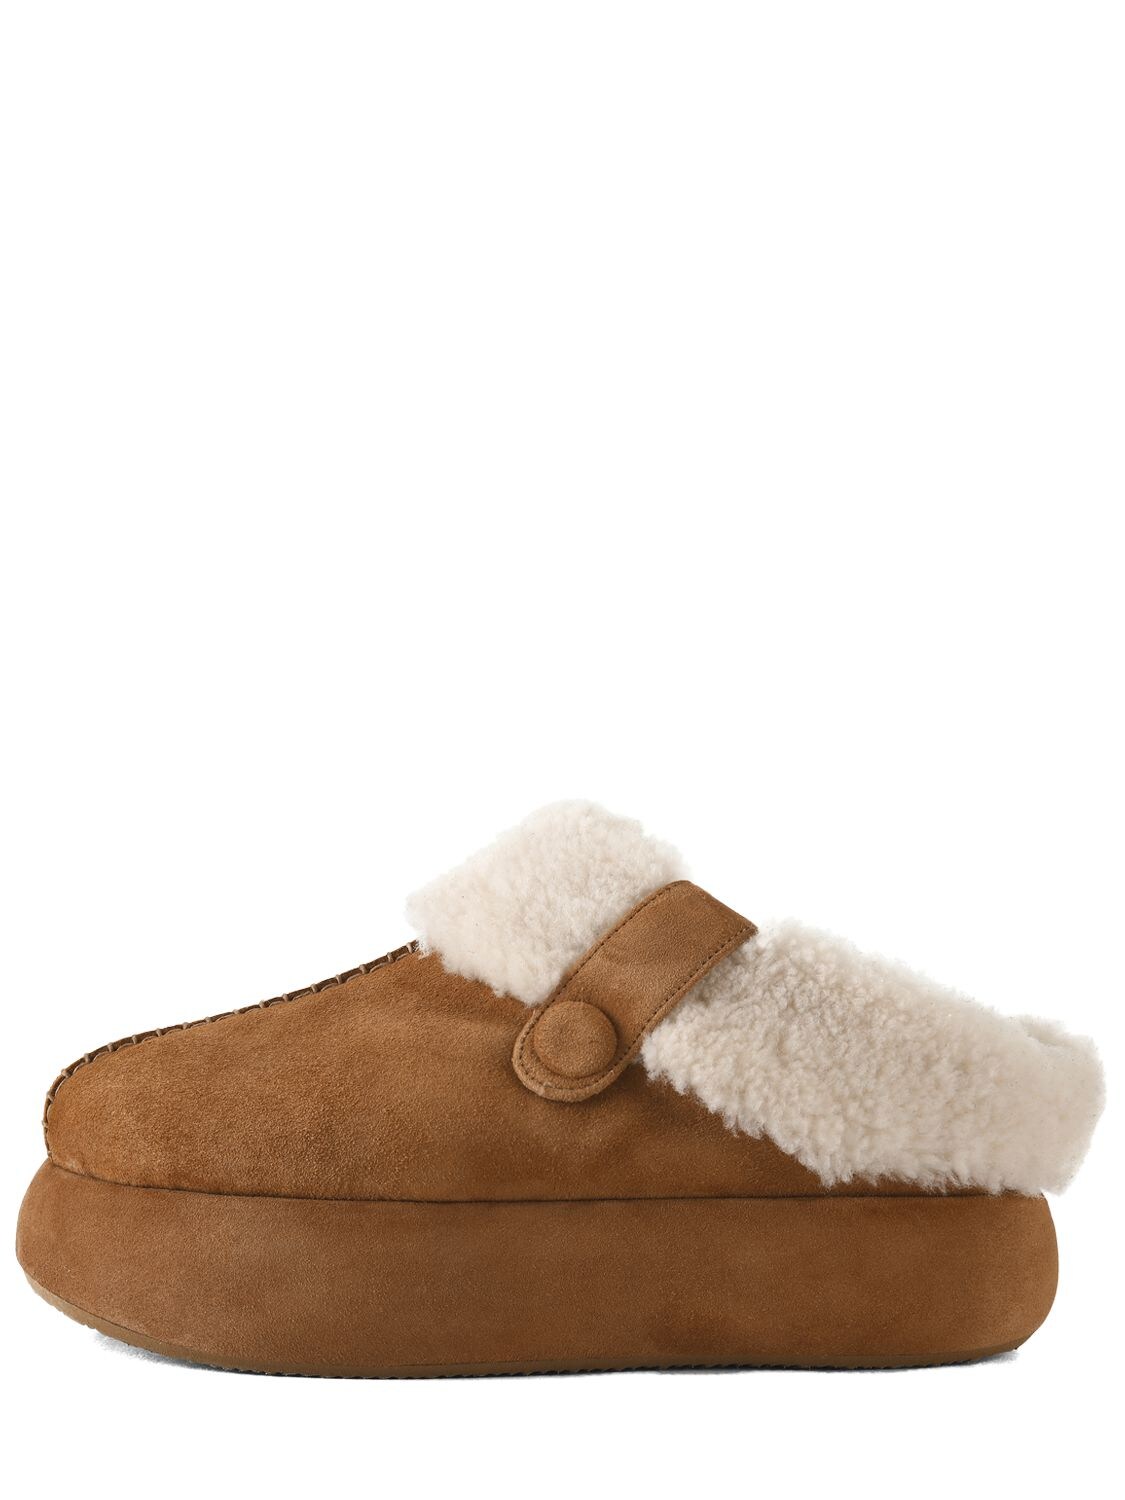 Osoi 40mm Suede & Shearling Wedges In Camel